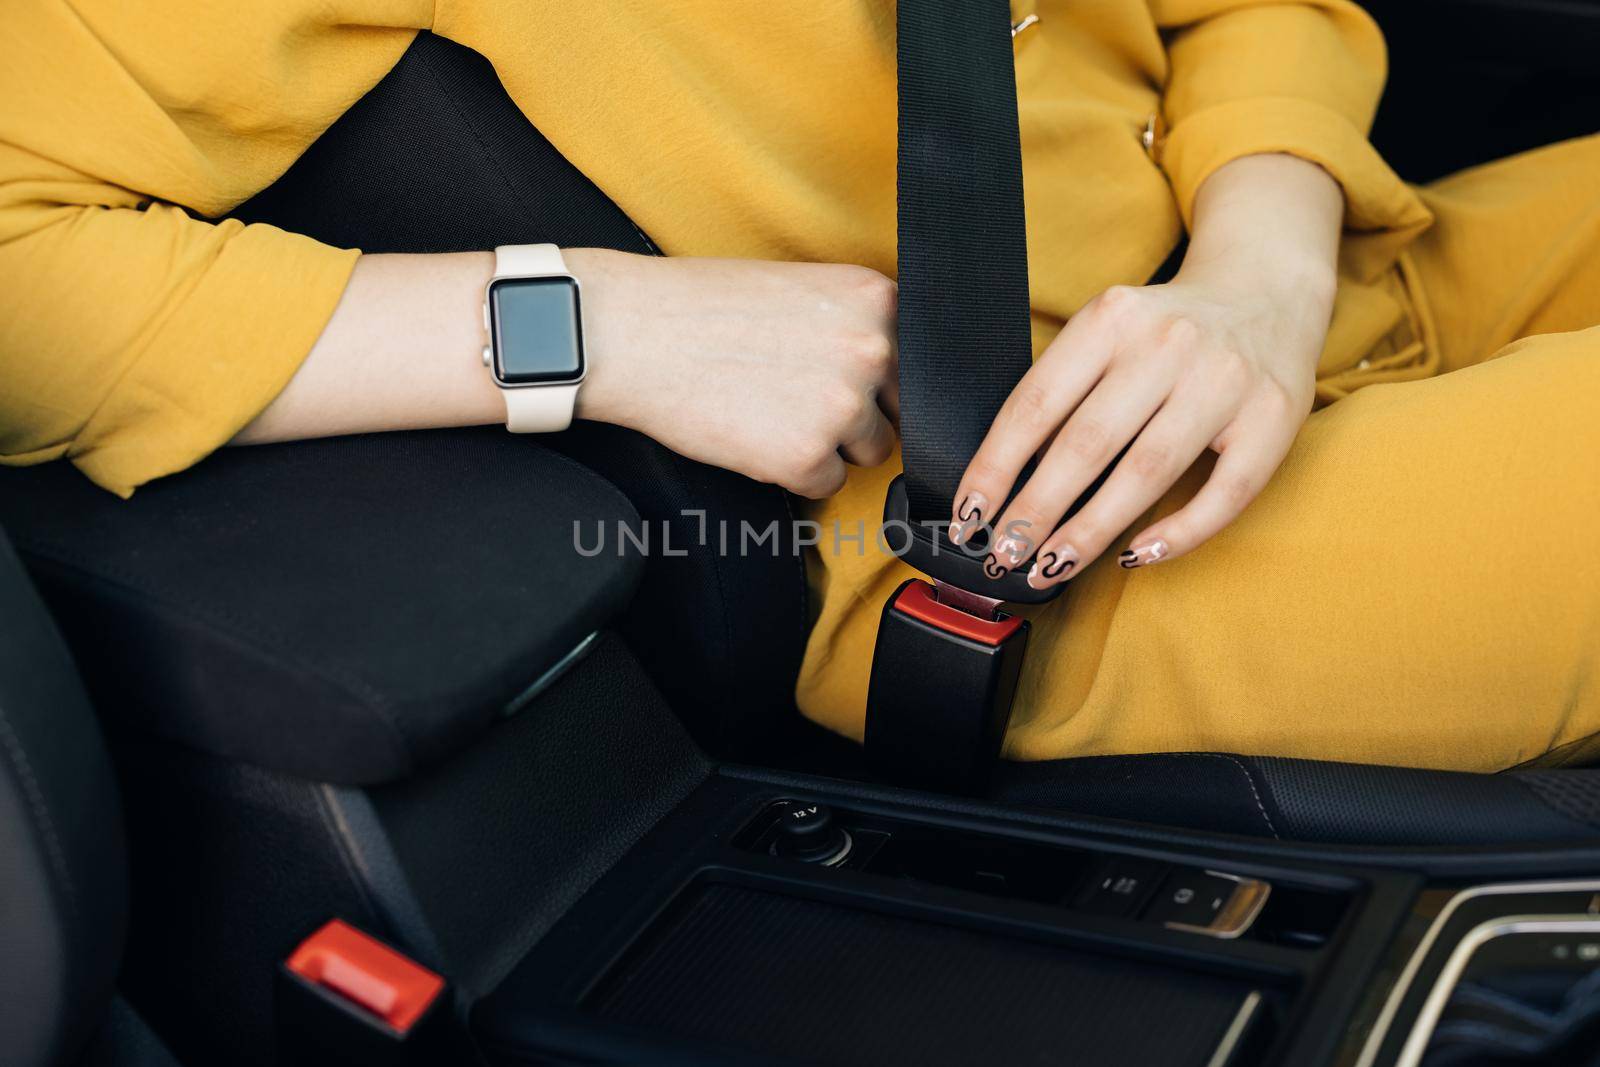 Buckle up seat belt in a car. Woman Hand Fastening Car Safety Seat Belt. Protection Road Safety Snap. Driver Fastening Seatbelt In Car. Woman Car Lap Buckling Inside Vehicle Before Driving by uflypro